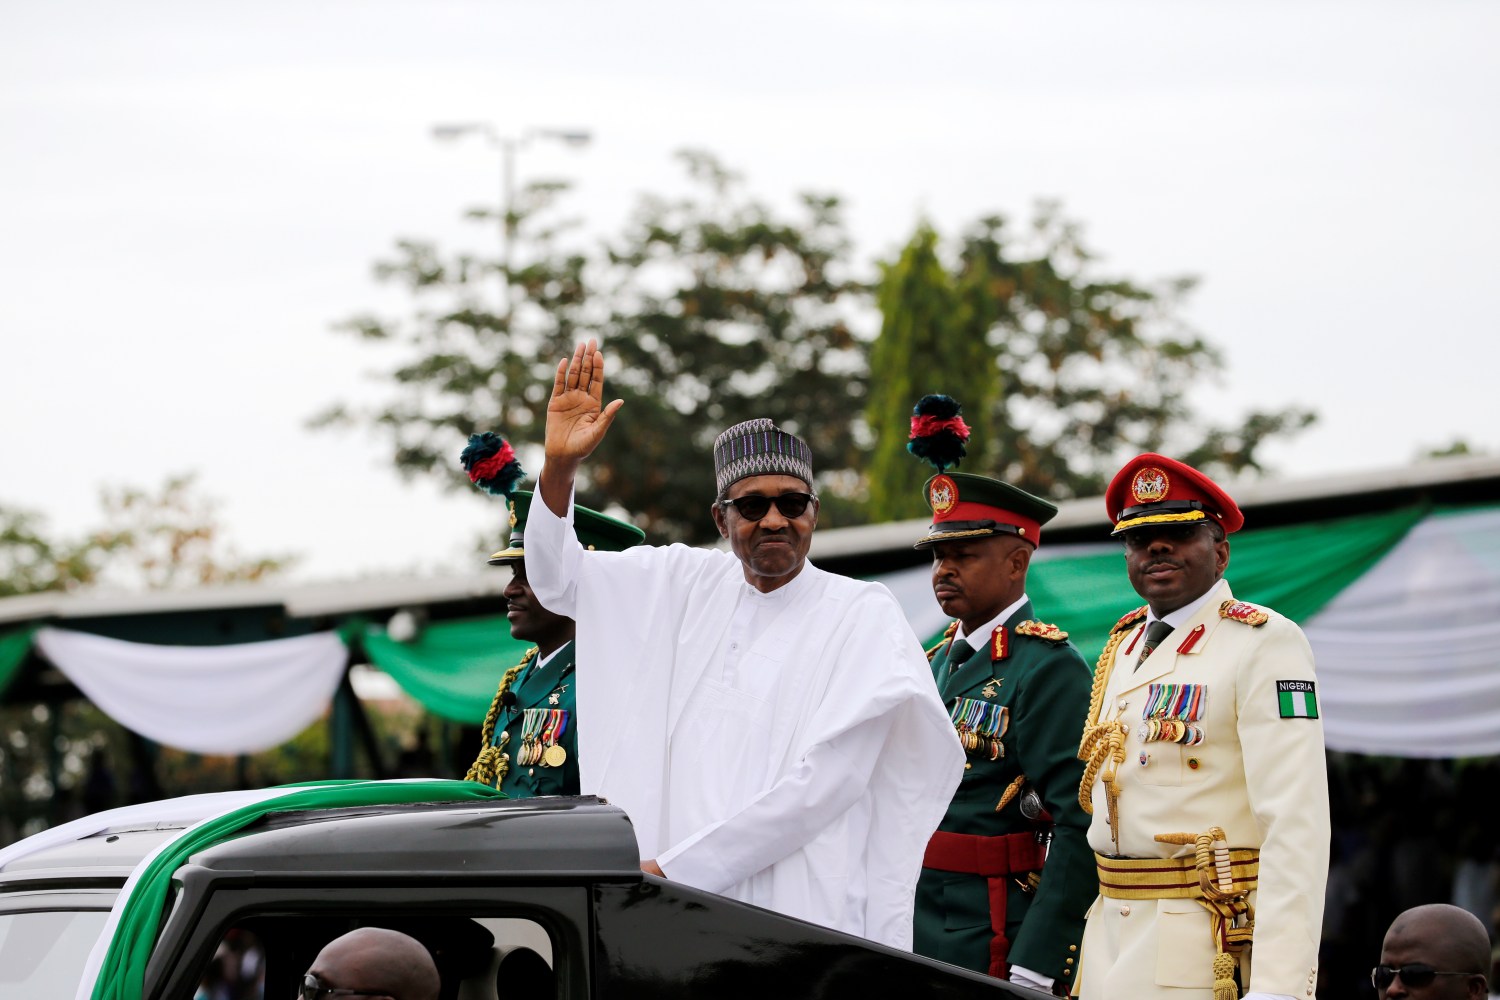 Nigerian President Muhammadu Buhari waves at the crowd while he drives around the venue during his inauguration for a second term in Abuja, Nigeria May 29, 2019. REUTERS/Afolabi Sotunde - RC1A84EB7CC0